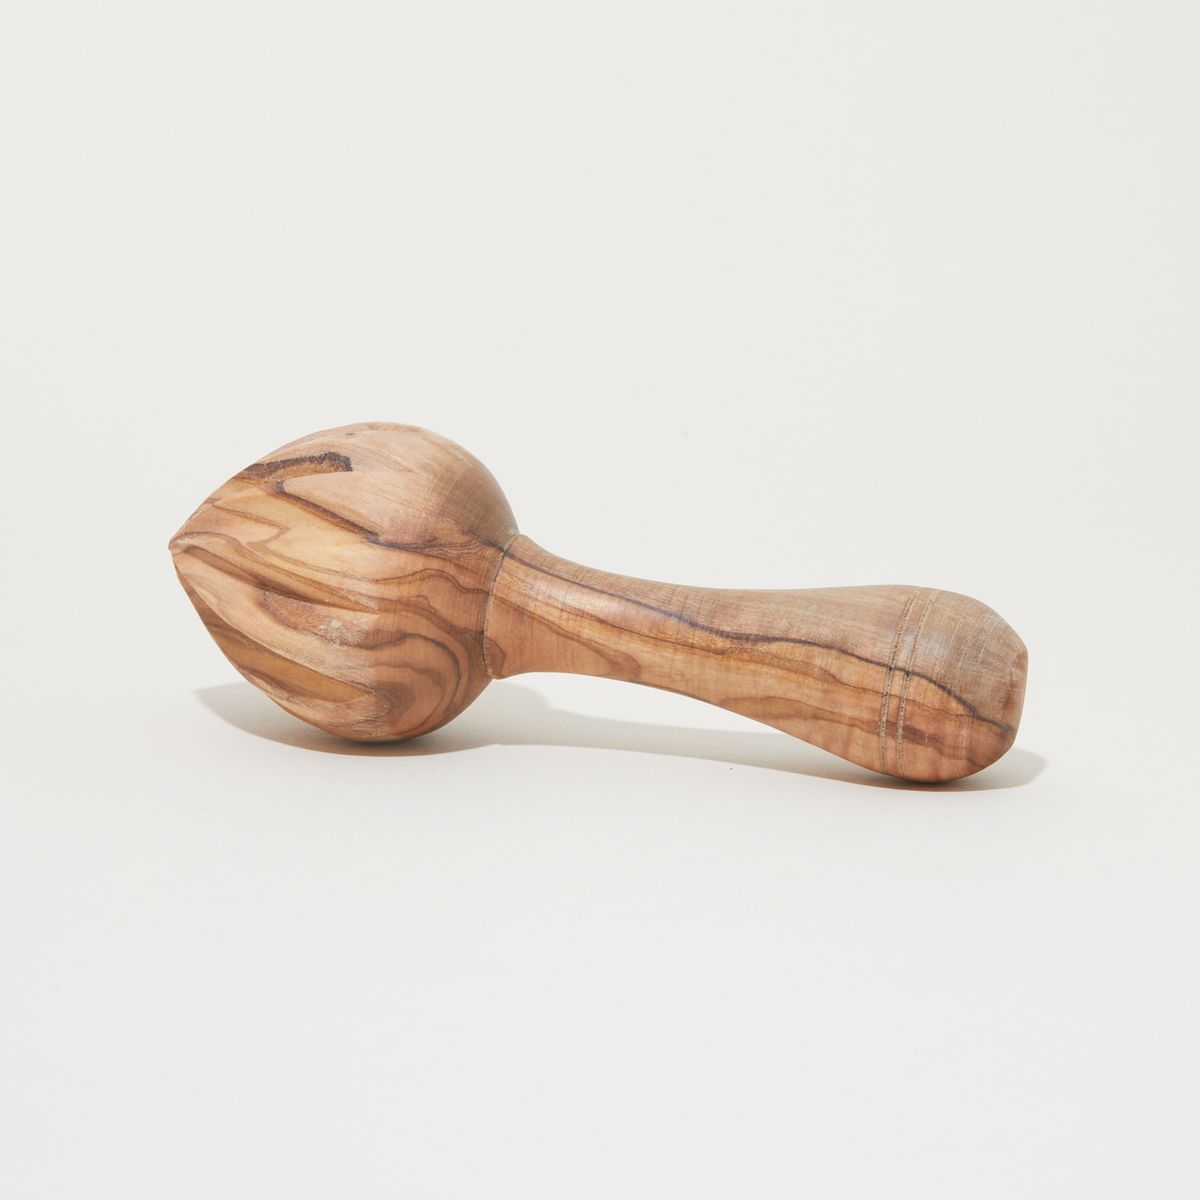 A citrus reamer made from marbled olivewood